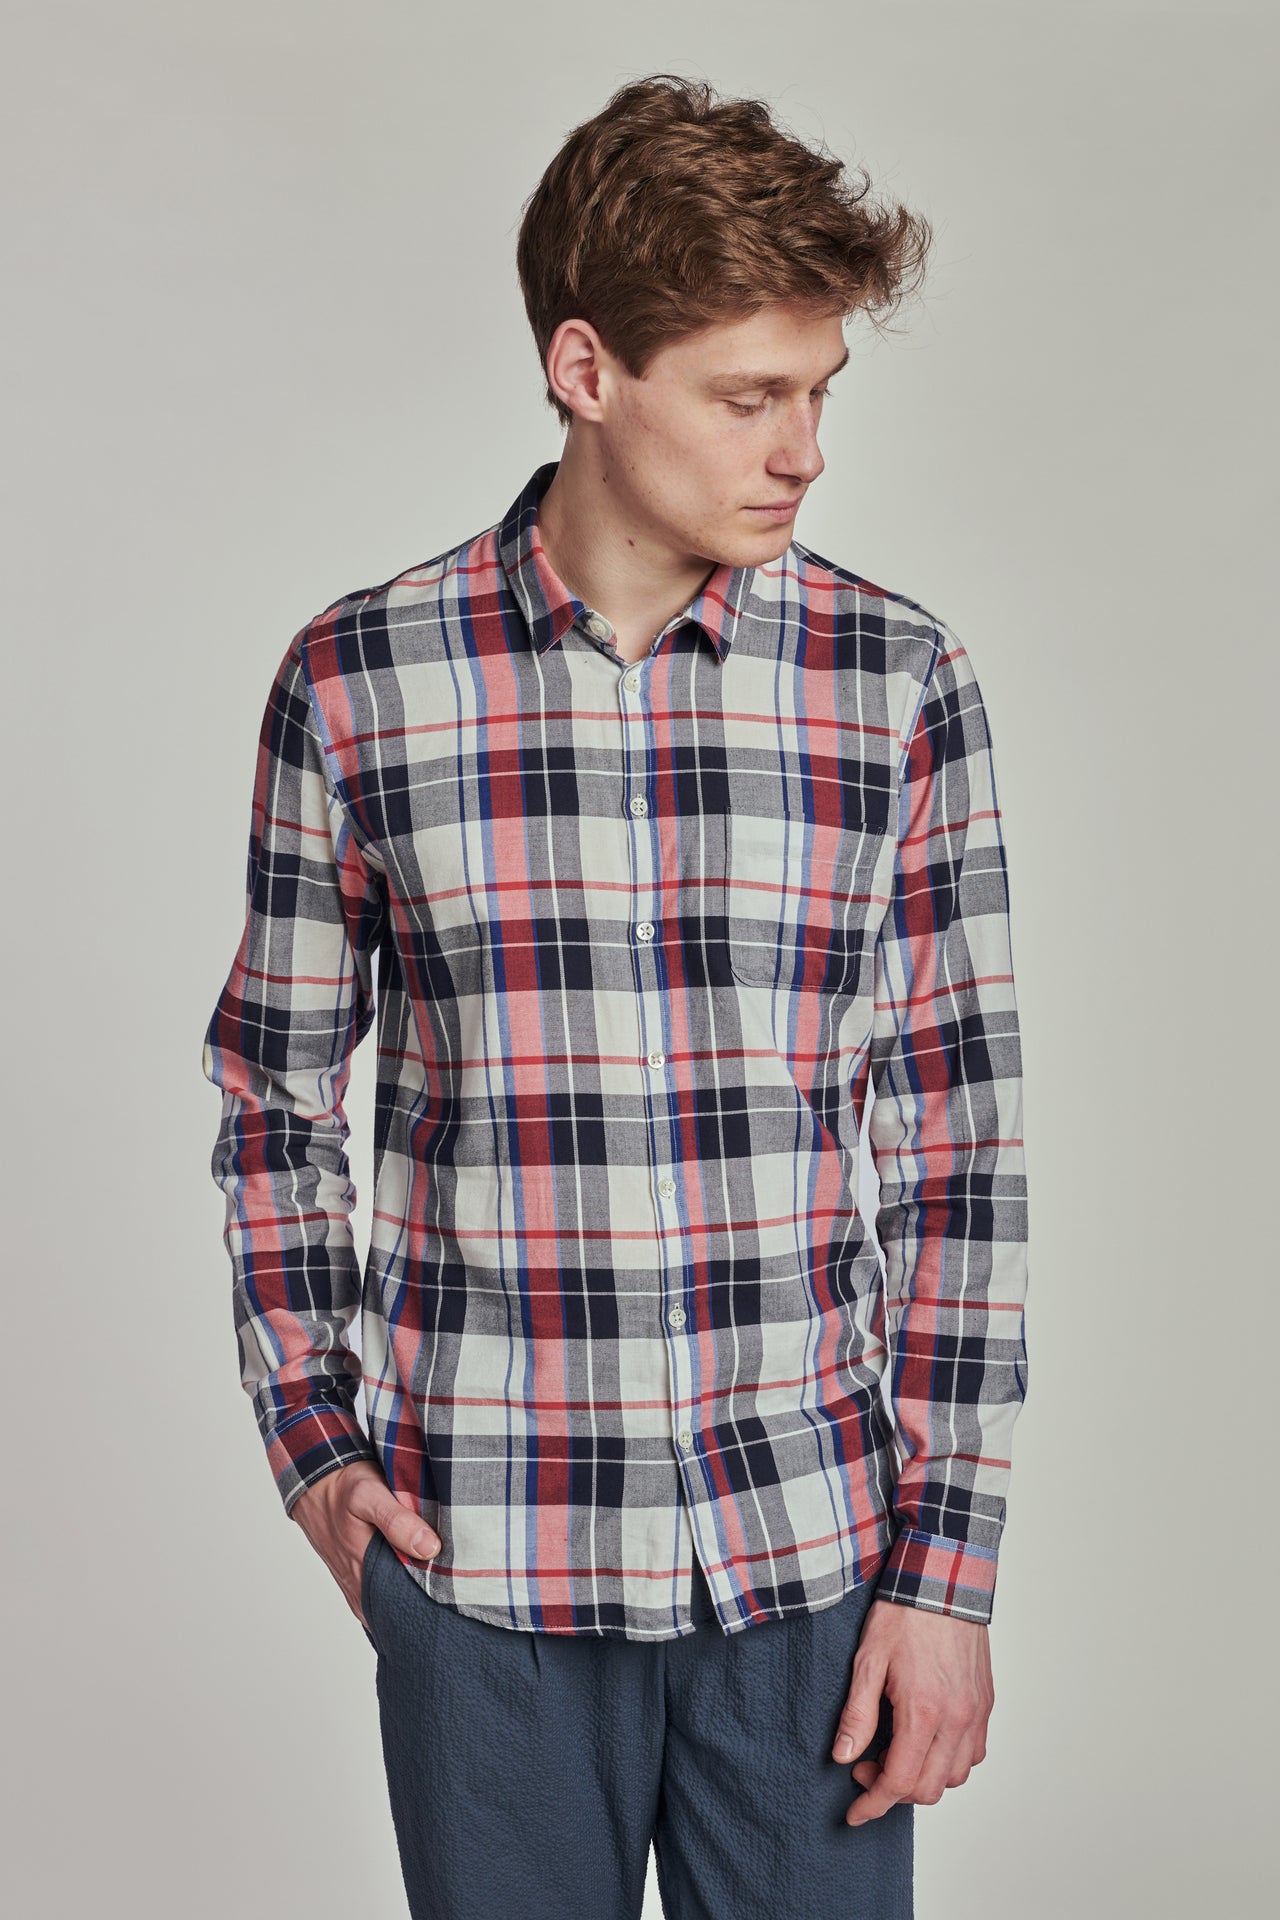 Proper Shirt in a Red, Black, Dark Blue and White chequered Japanese Cotton Flannel